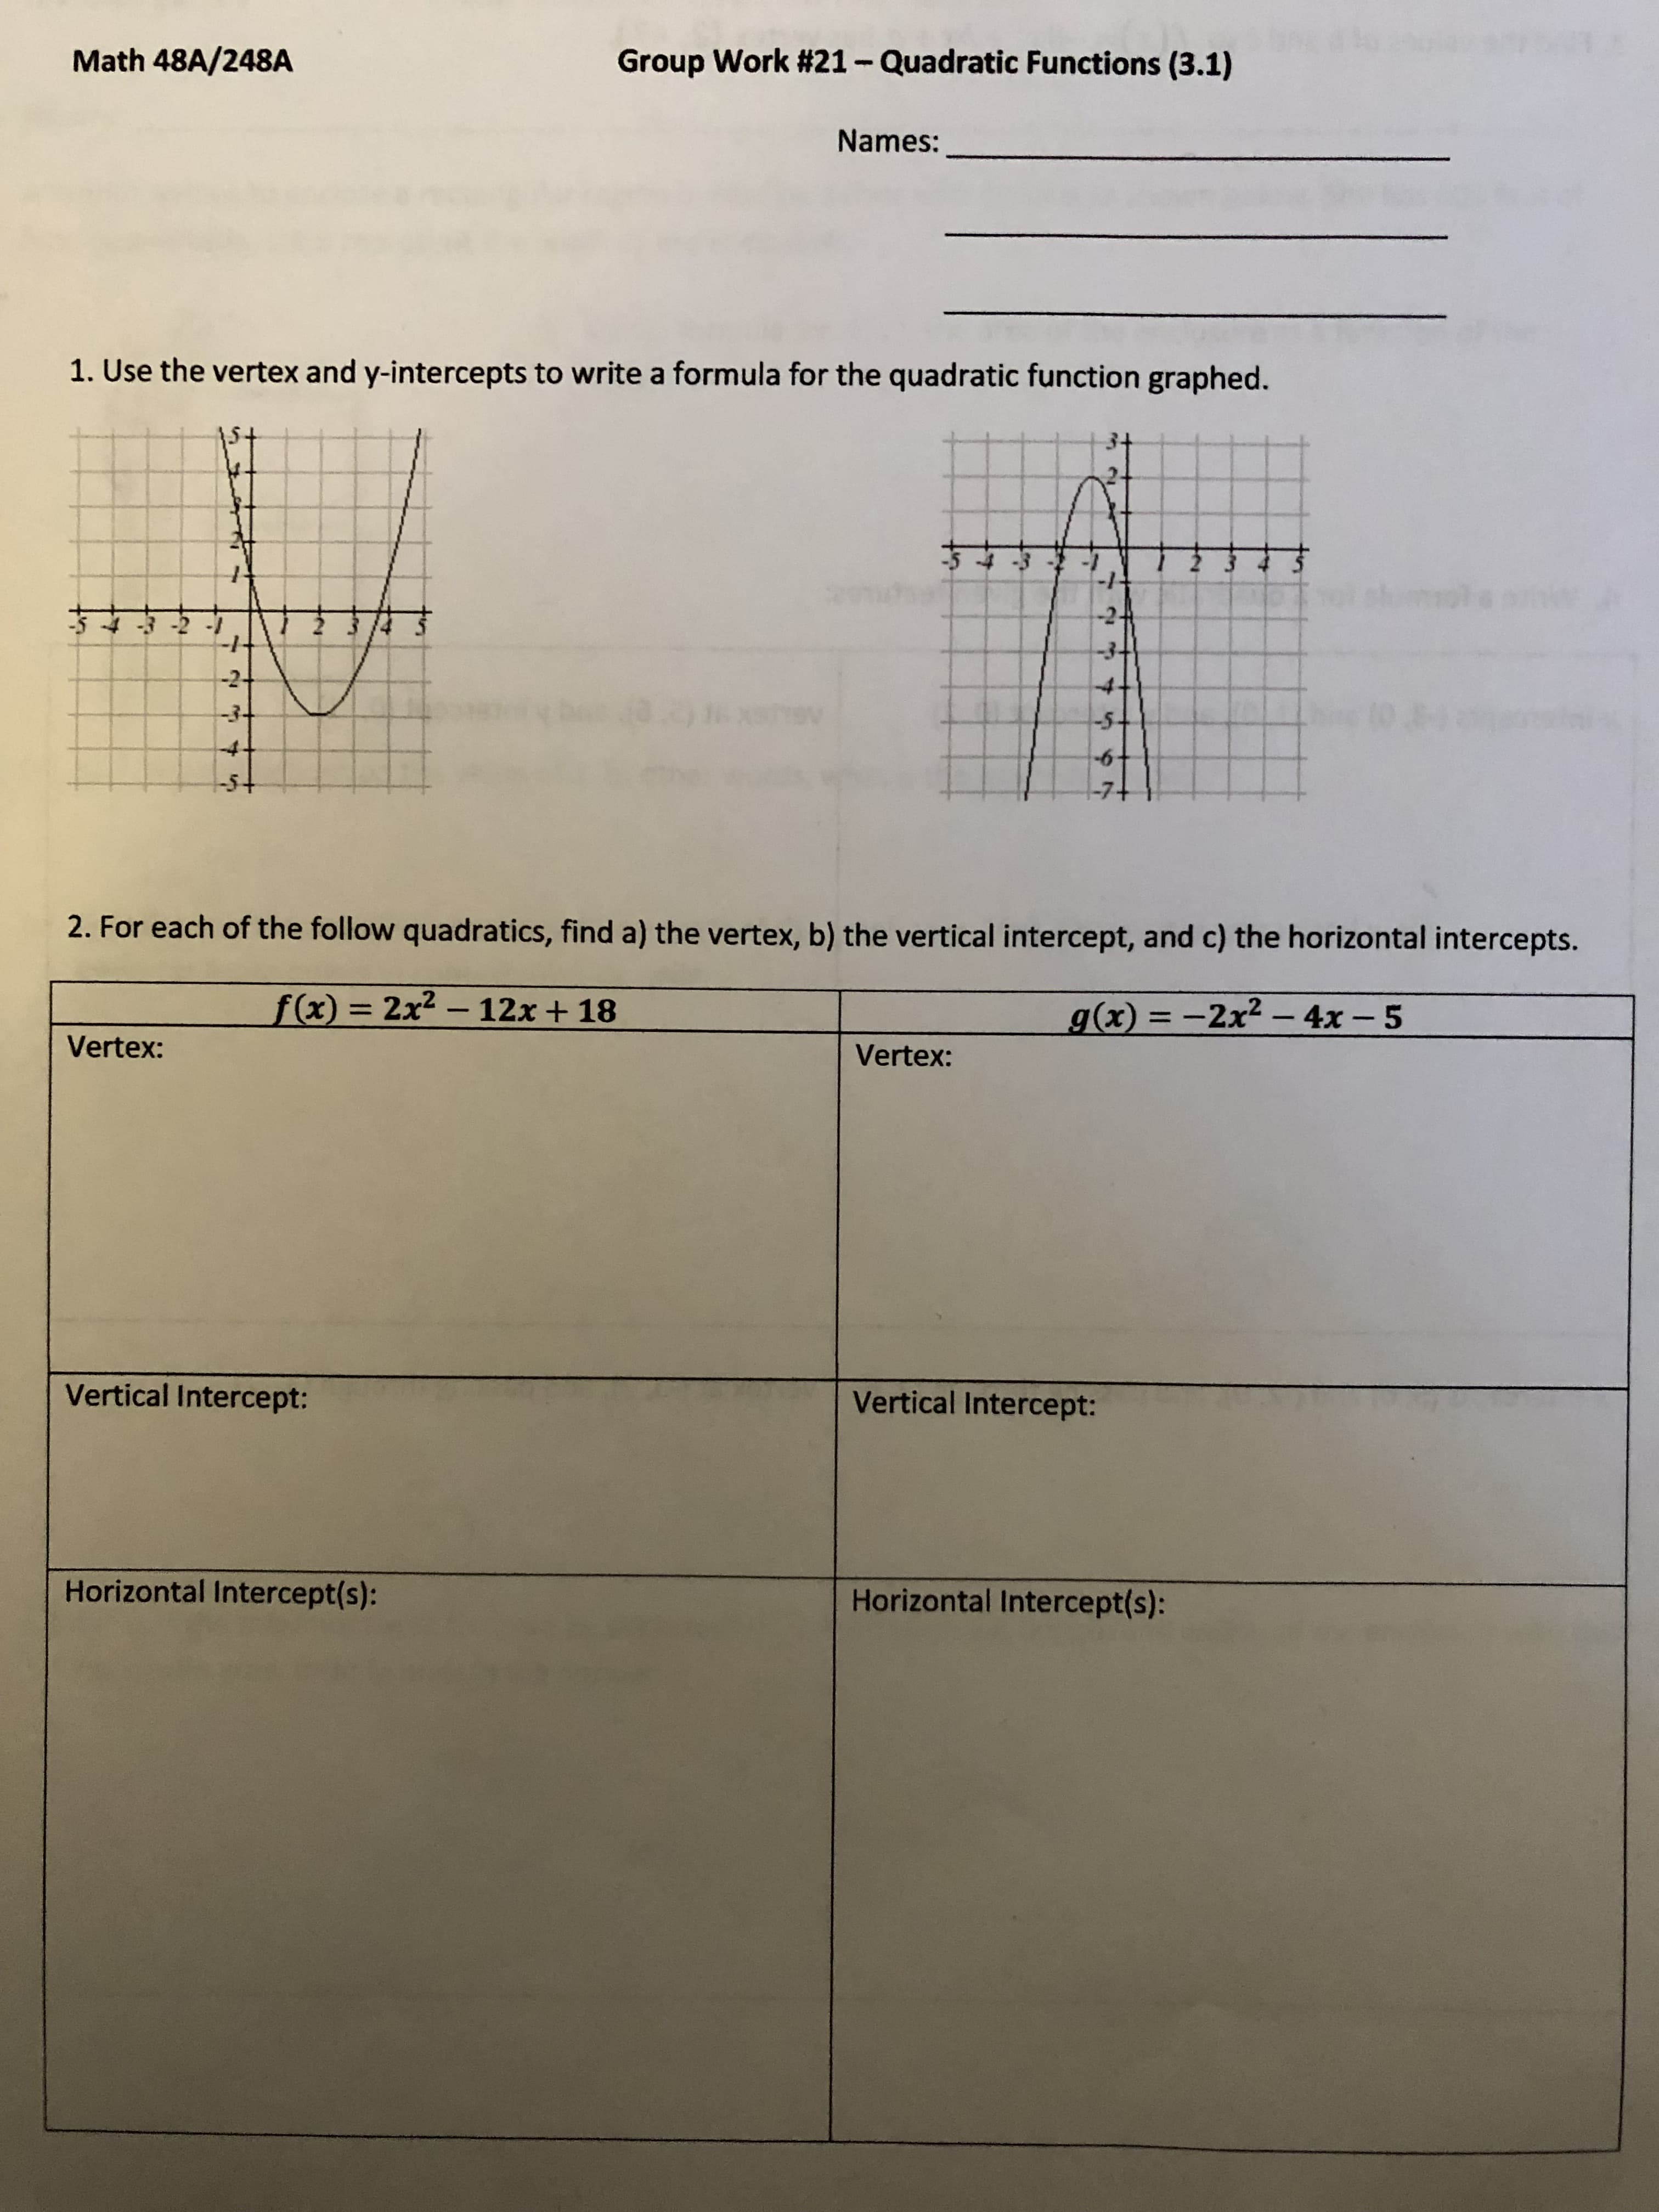 Math 48A/248A
Group Work #21-Quadratic Functions (3.1)
Names:
1. Use the vertex and y-intercepts to write a formula for the quadratic function graphed.
1- ८-
4.
4.
2. For each of the follow quadratics, find a) the vertex, b) the vertical intercept, and c) the horizontal intercepts.
f(x) = 2x2 - 12x + 18
g(x) = -2x2- 4x – 5
|
%3D
Vertex:
Vertex:
Vertical Intercept:
Vertical Intercept:
Horizontal Intercept(s):
Horizontal Intercept(s):
